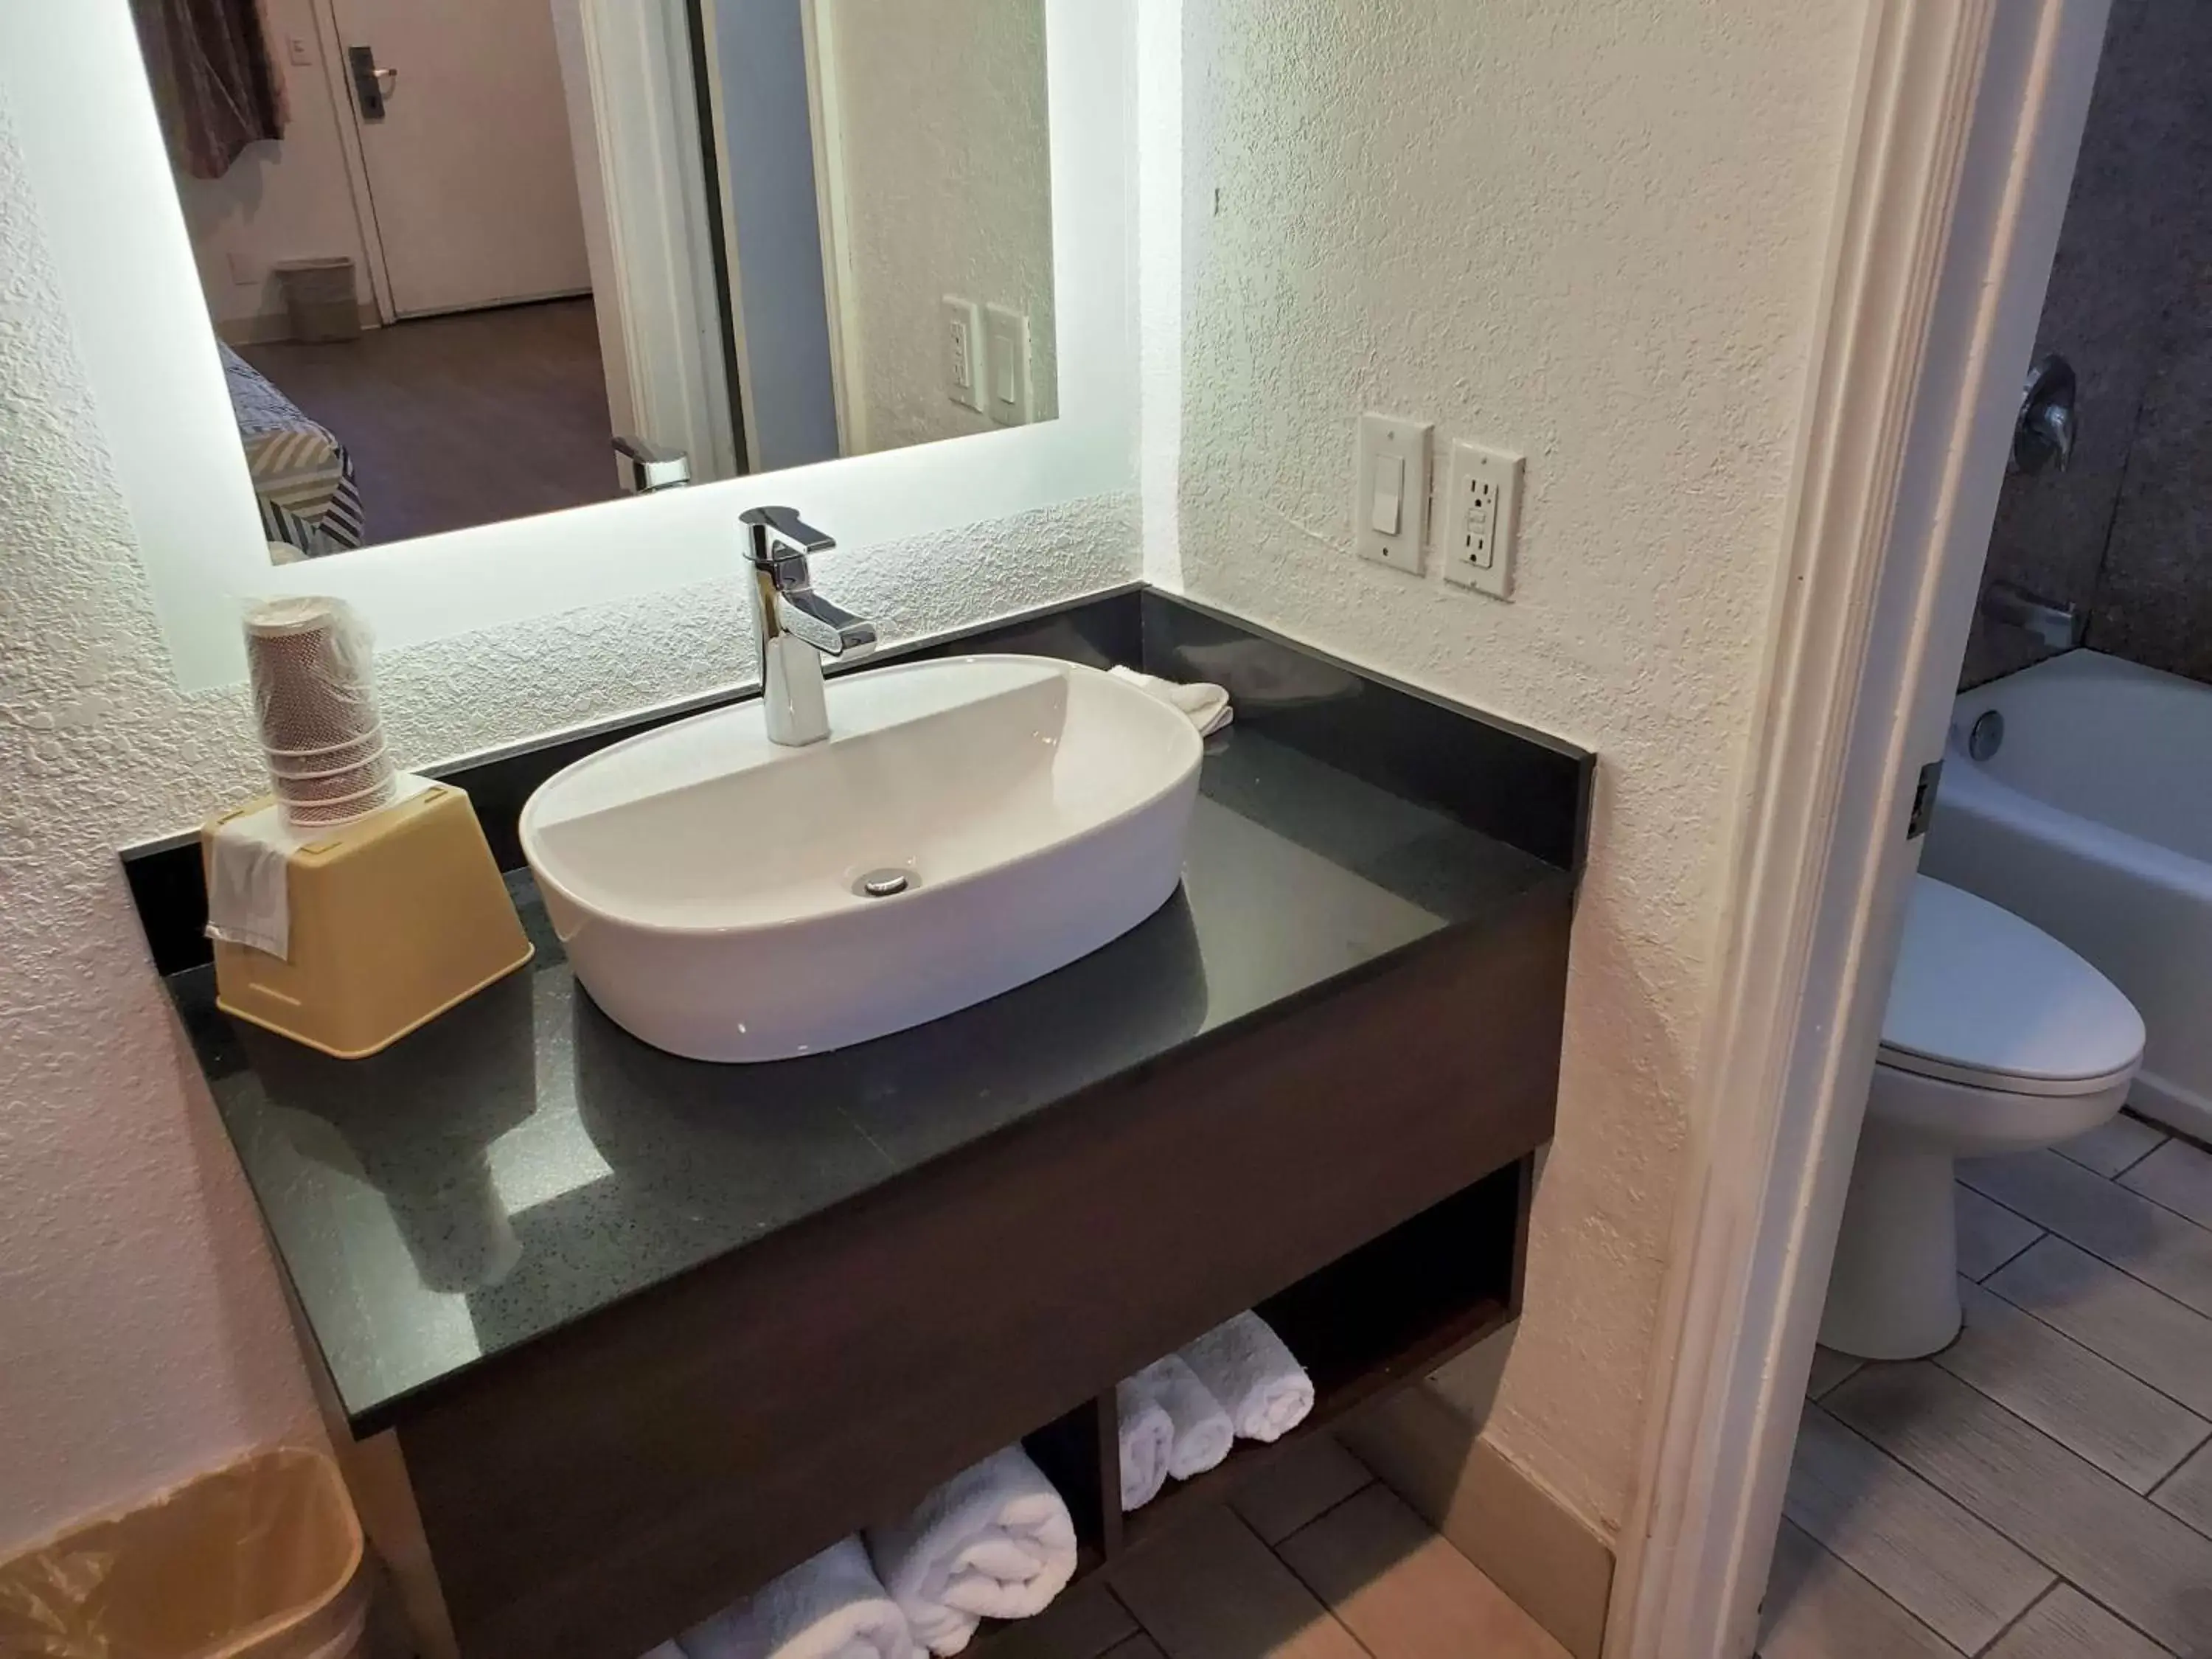 Photo of the whole room, Bathroom in Studio 6-National City, CA - Naval Base San Diego